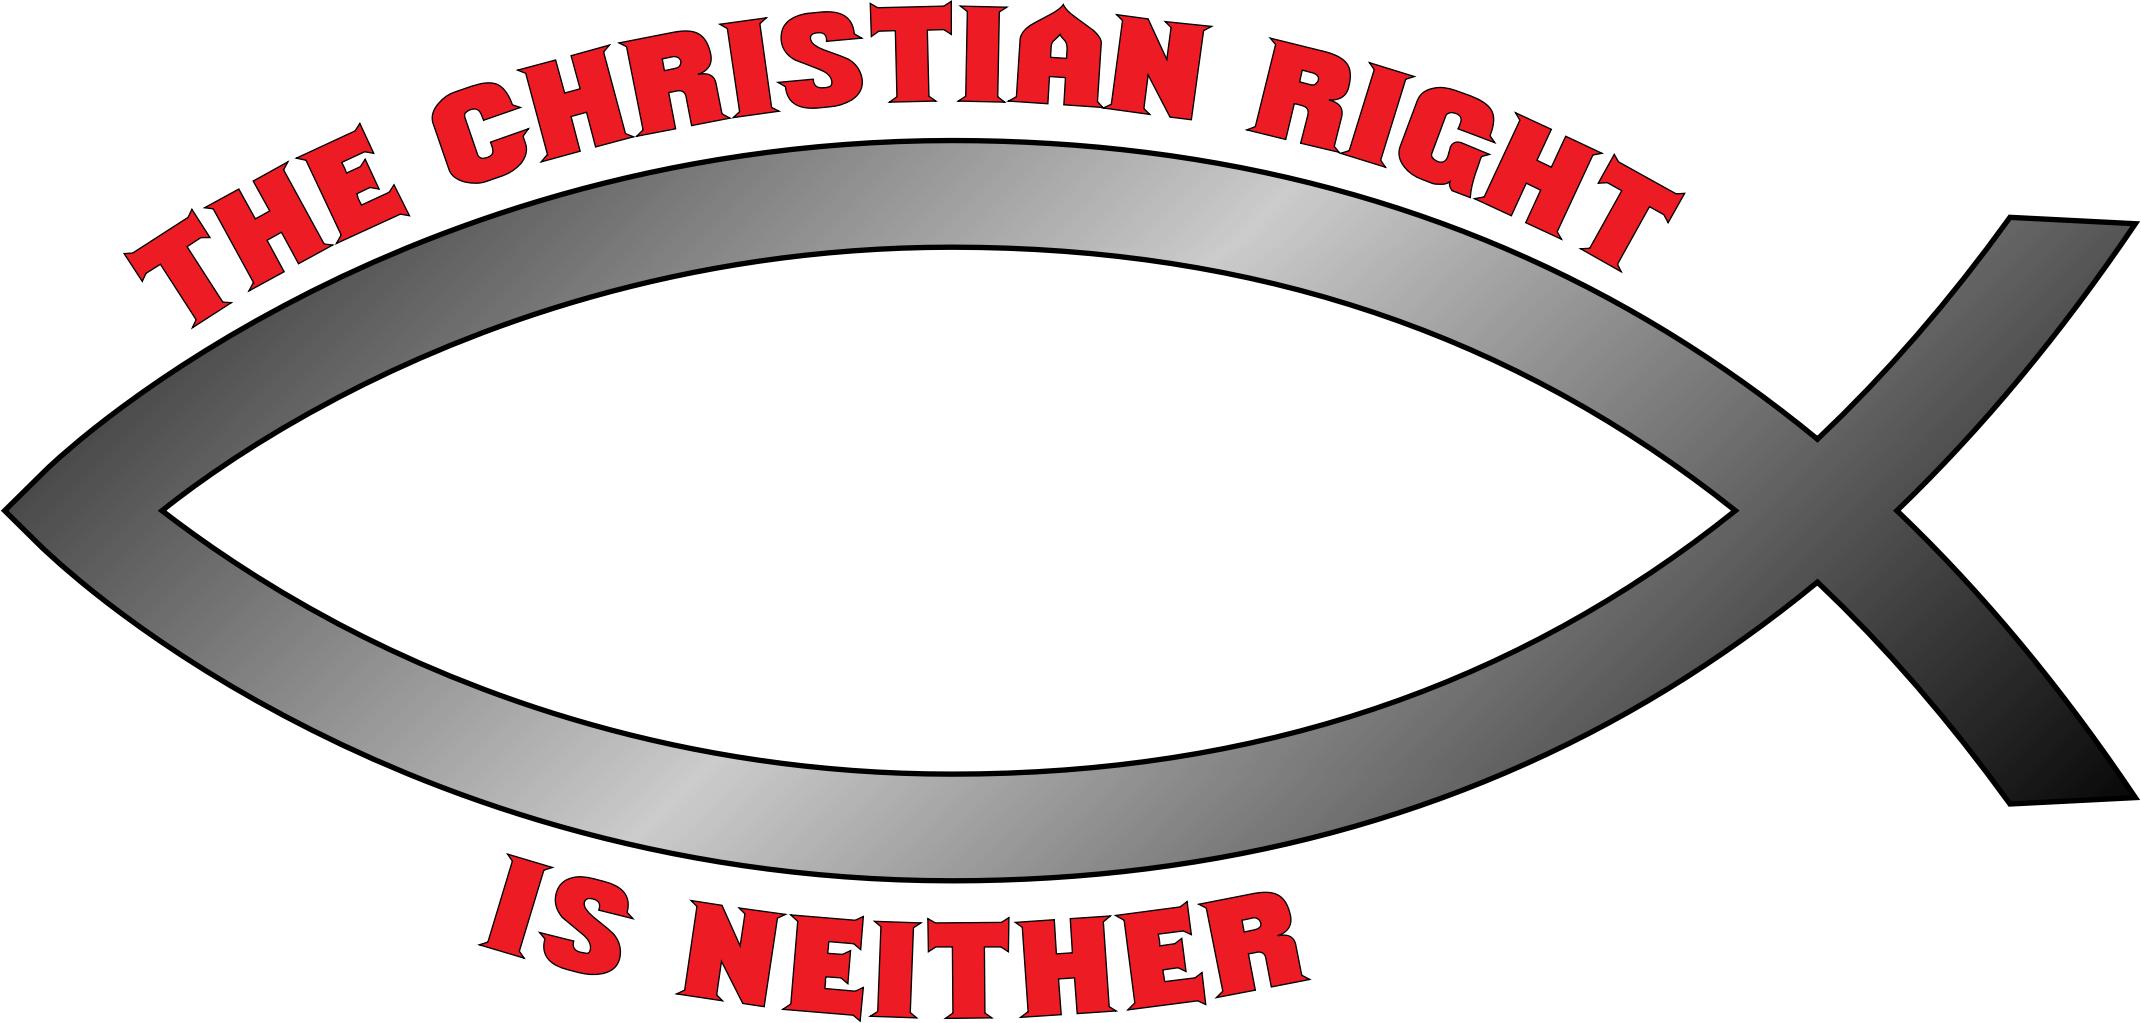 The Christian Right is neither bumper sticker png